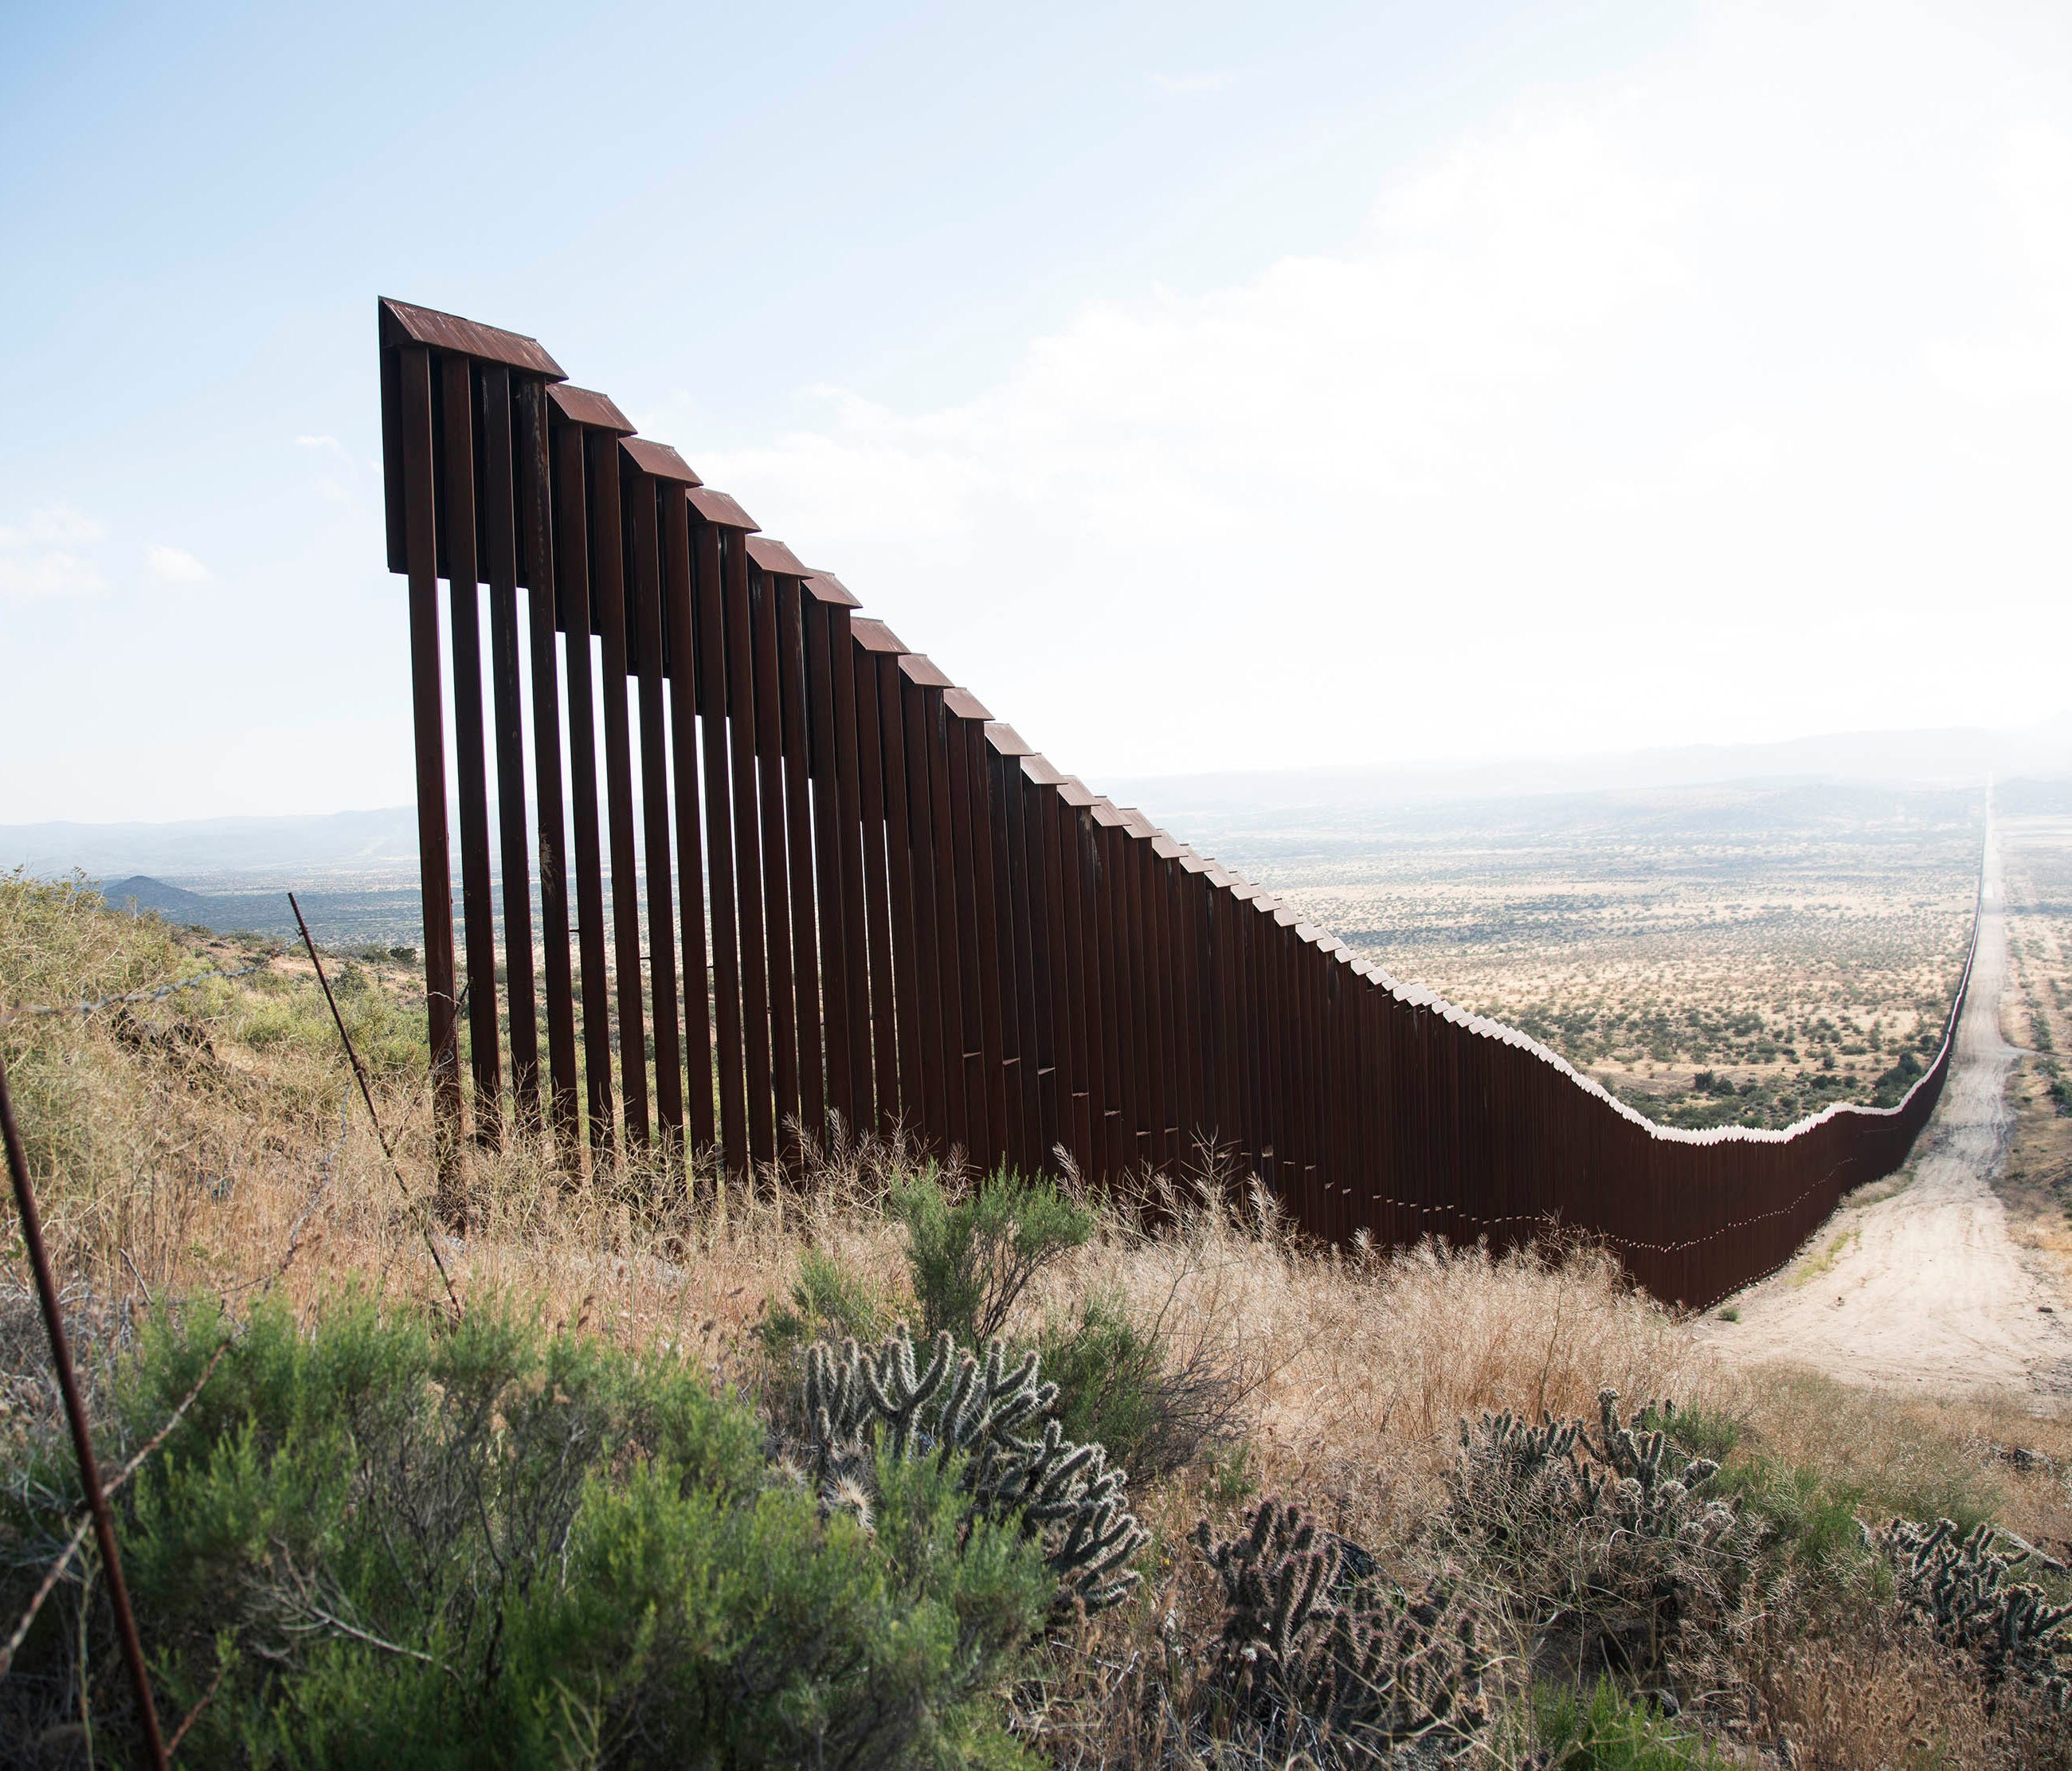 A gap in the U.S. Mexico border fence near Jacumba, Calif., on May 16, 2017.